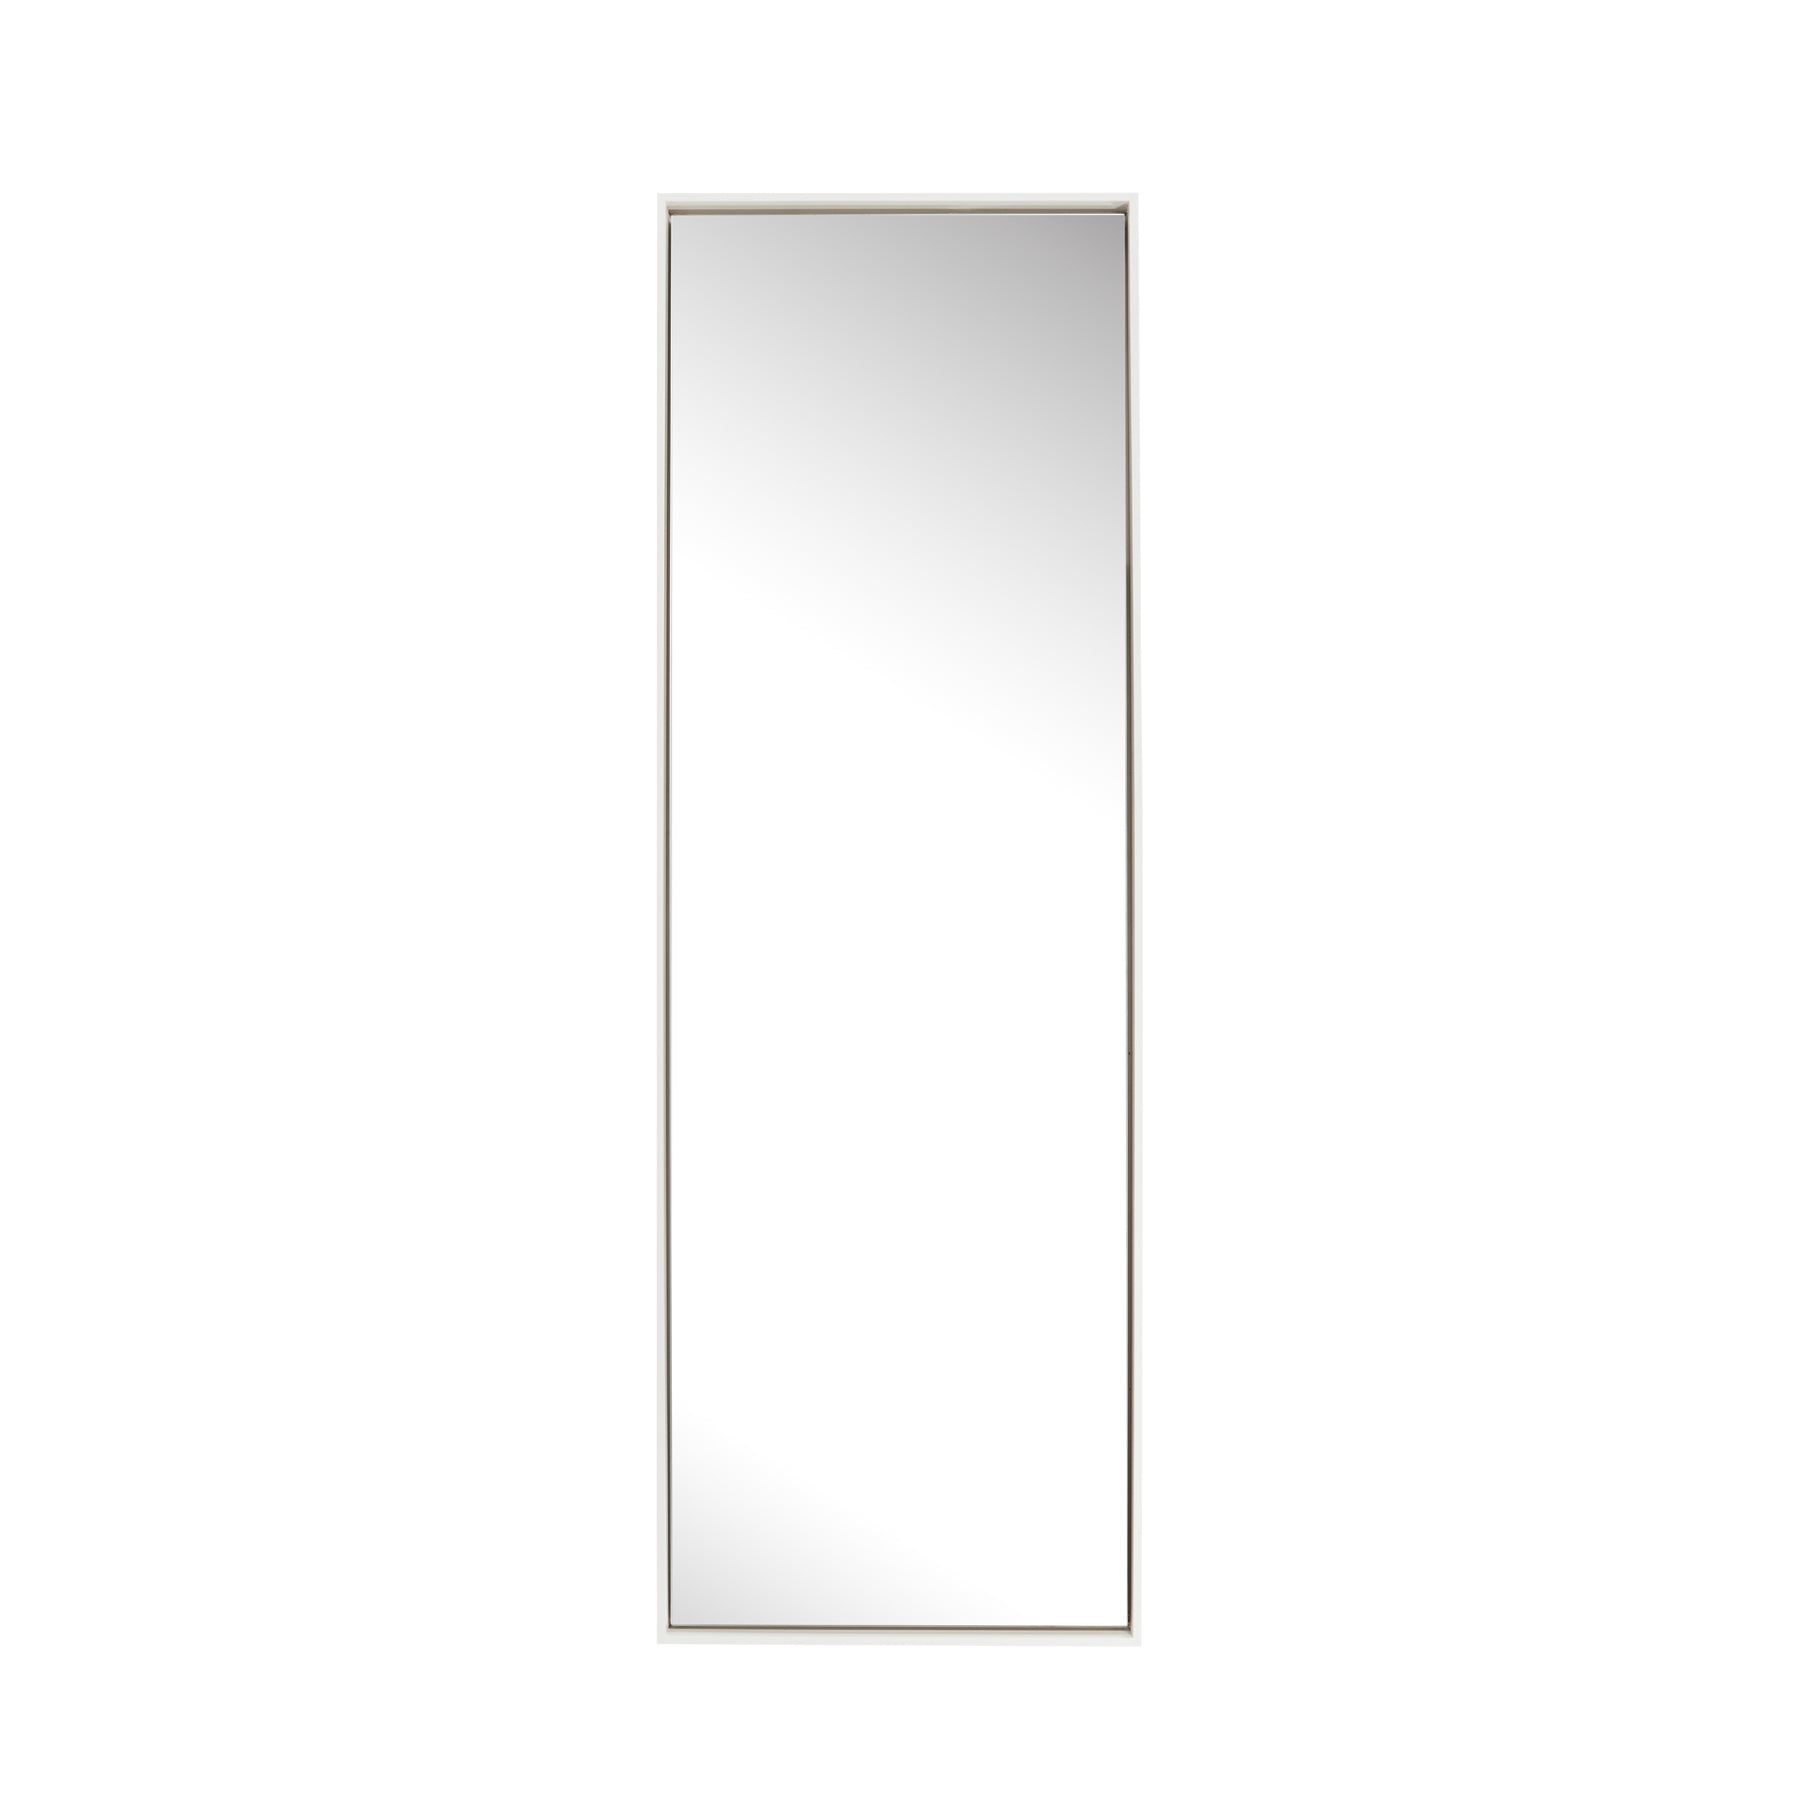 Lily Floating Box Super Dress Mirror - White Finish - Paramount Mirrors and Prints